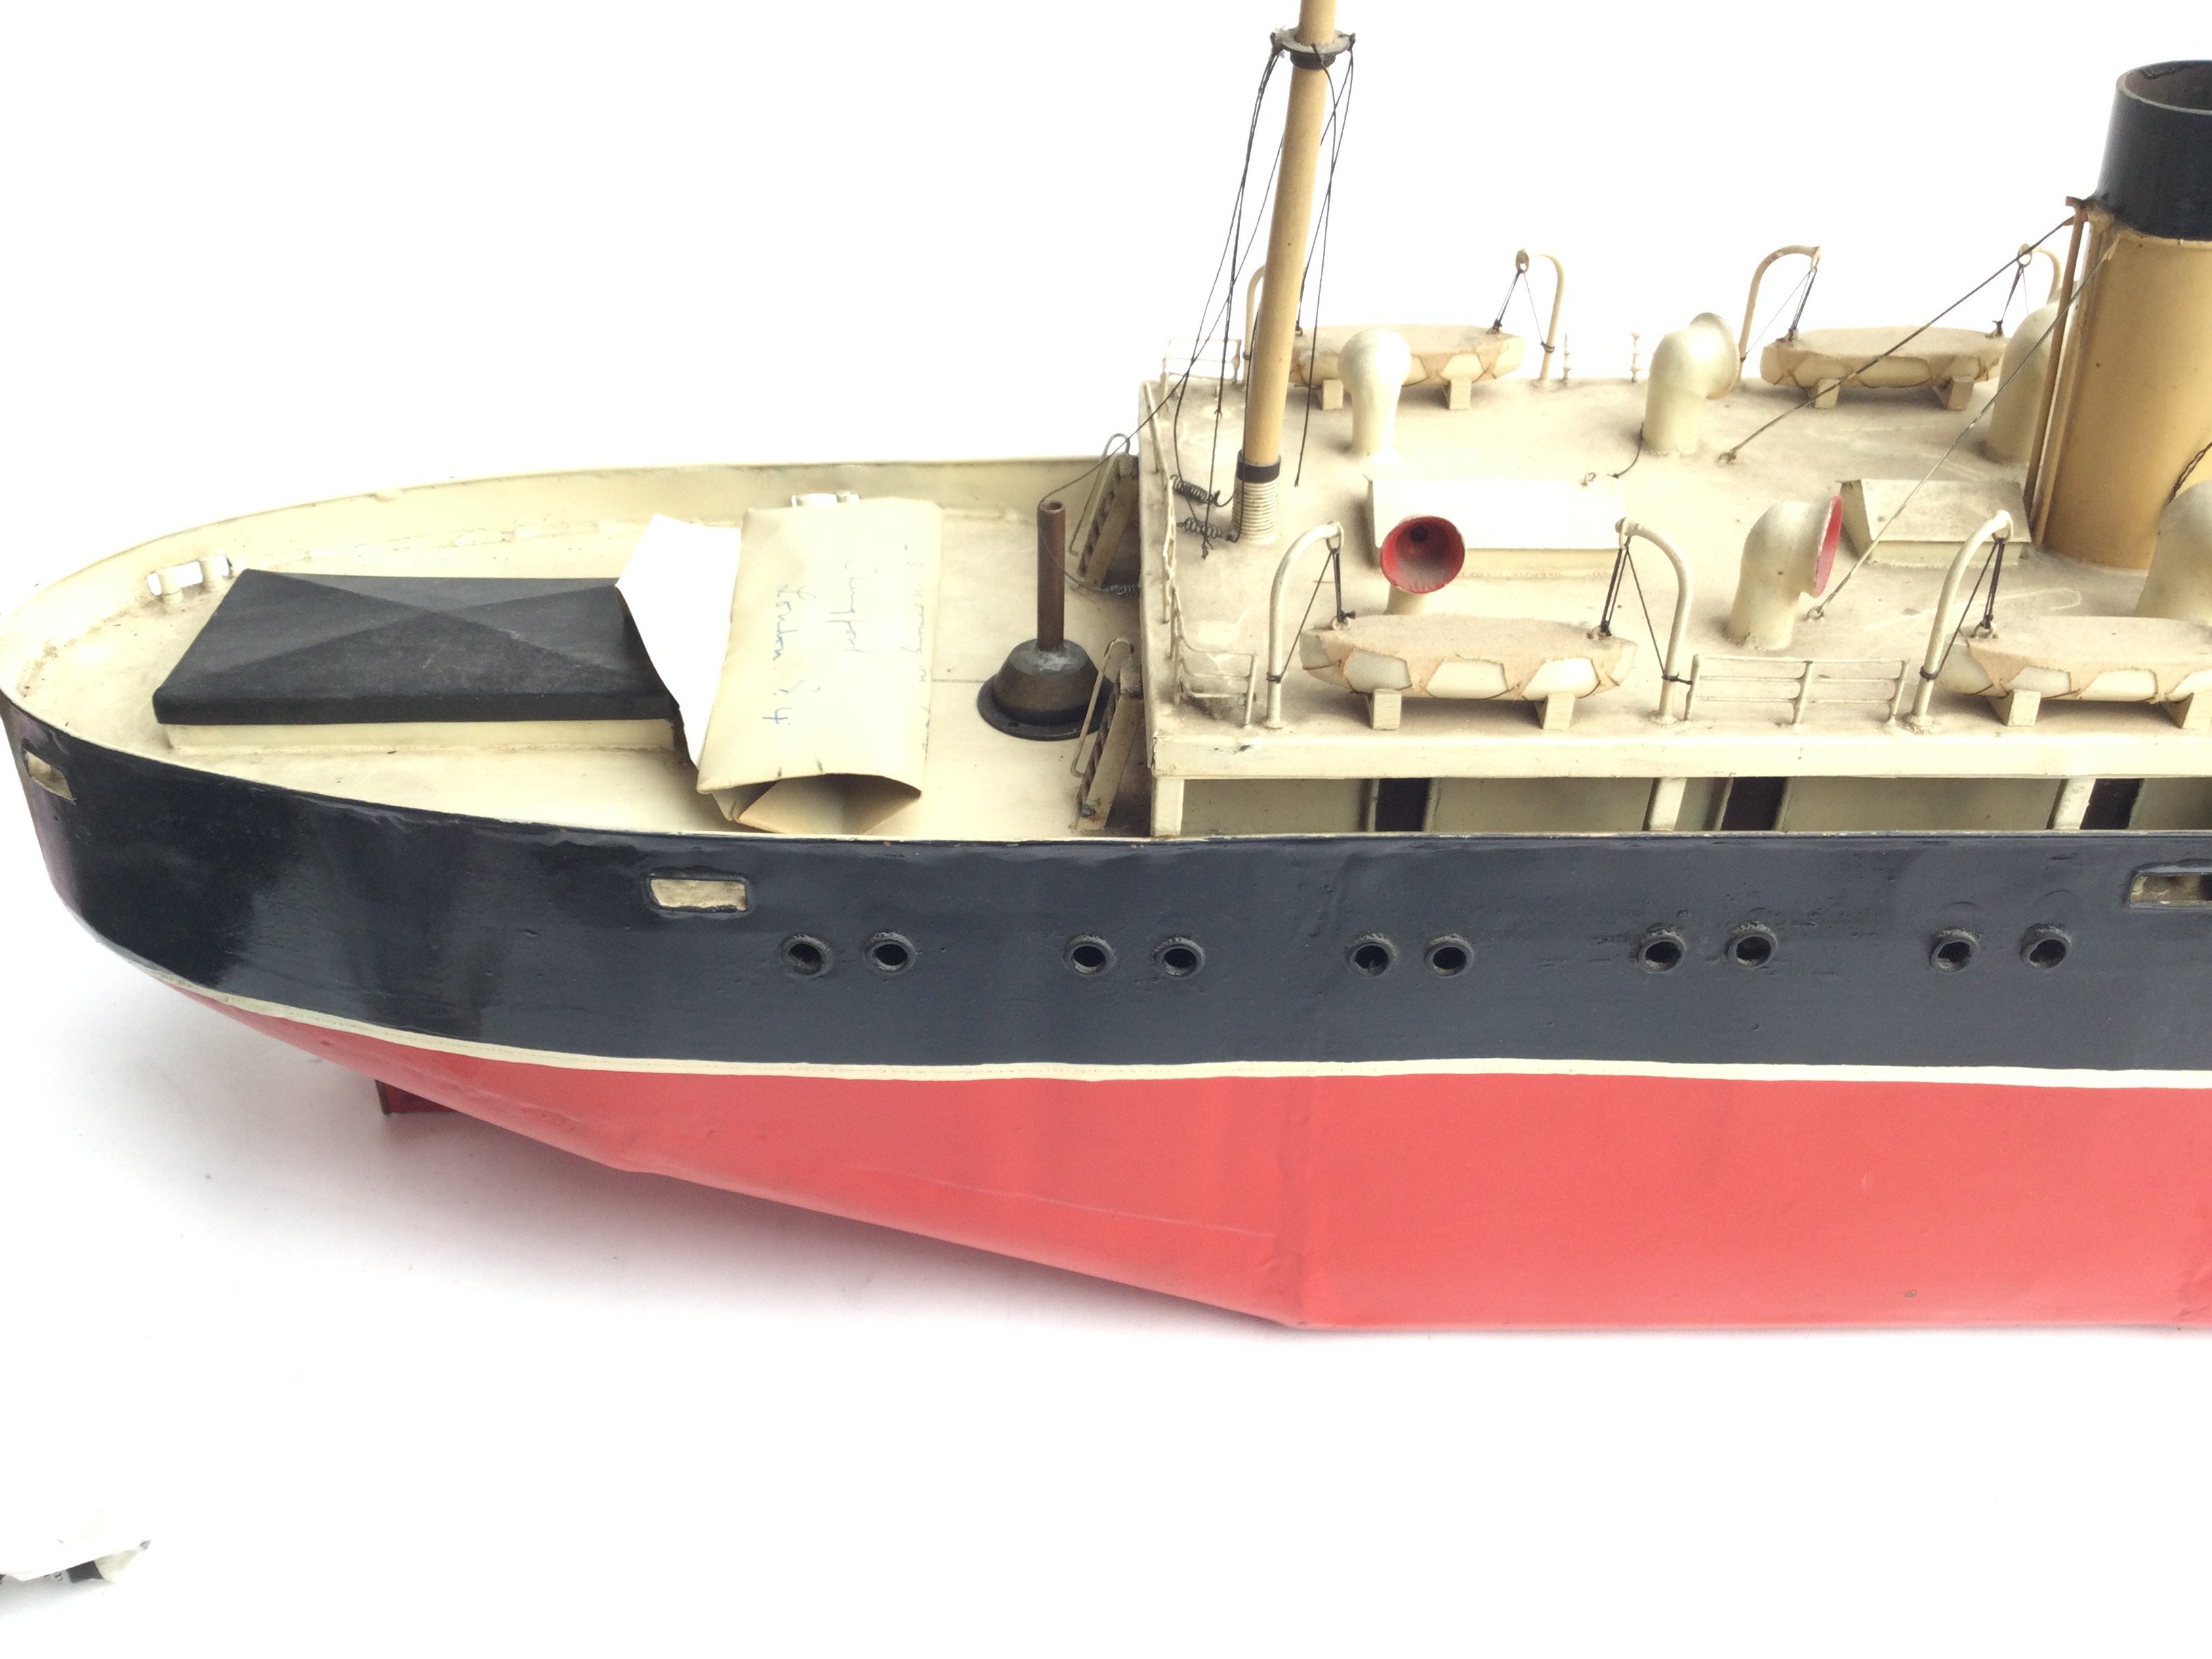 A Scratch Built Metal Steam Boat Approx length 98 - Image 3 of 4